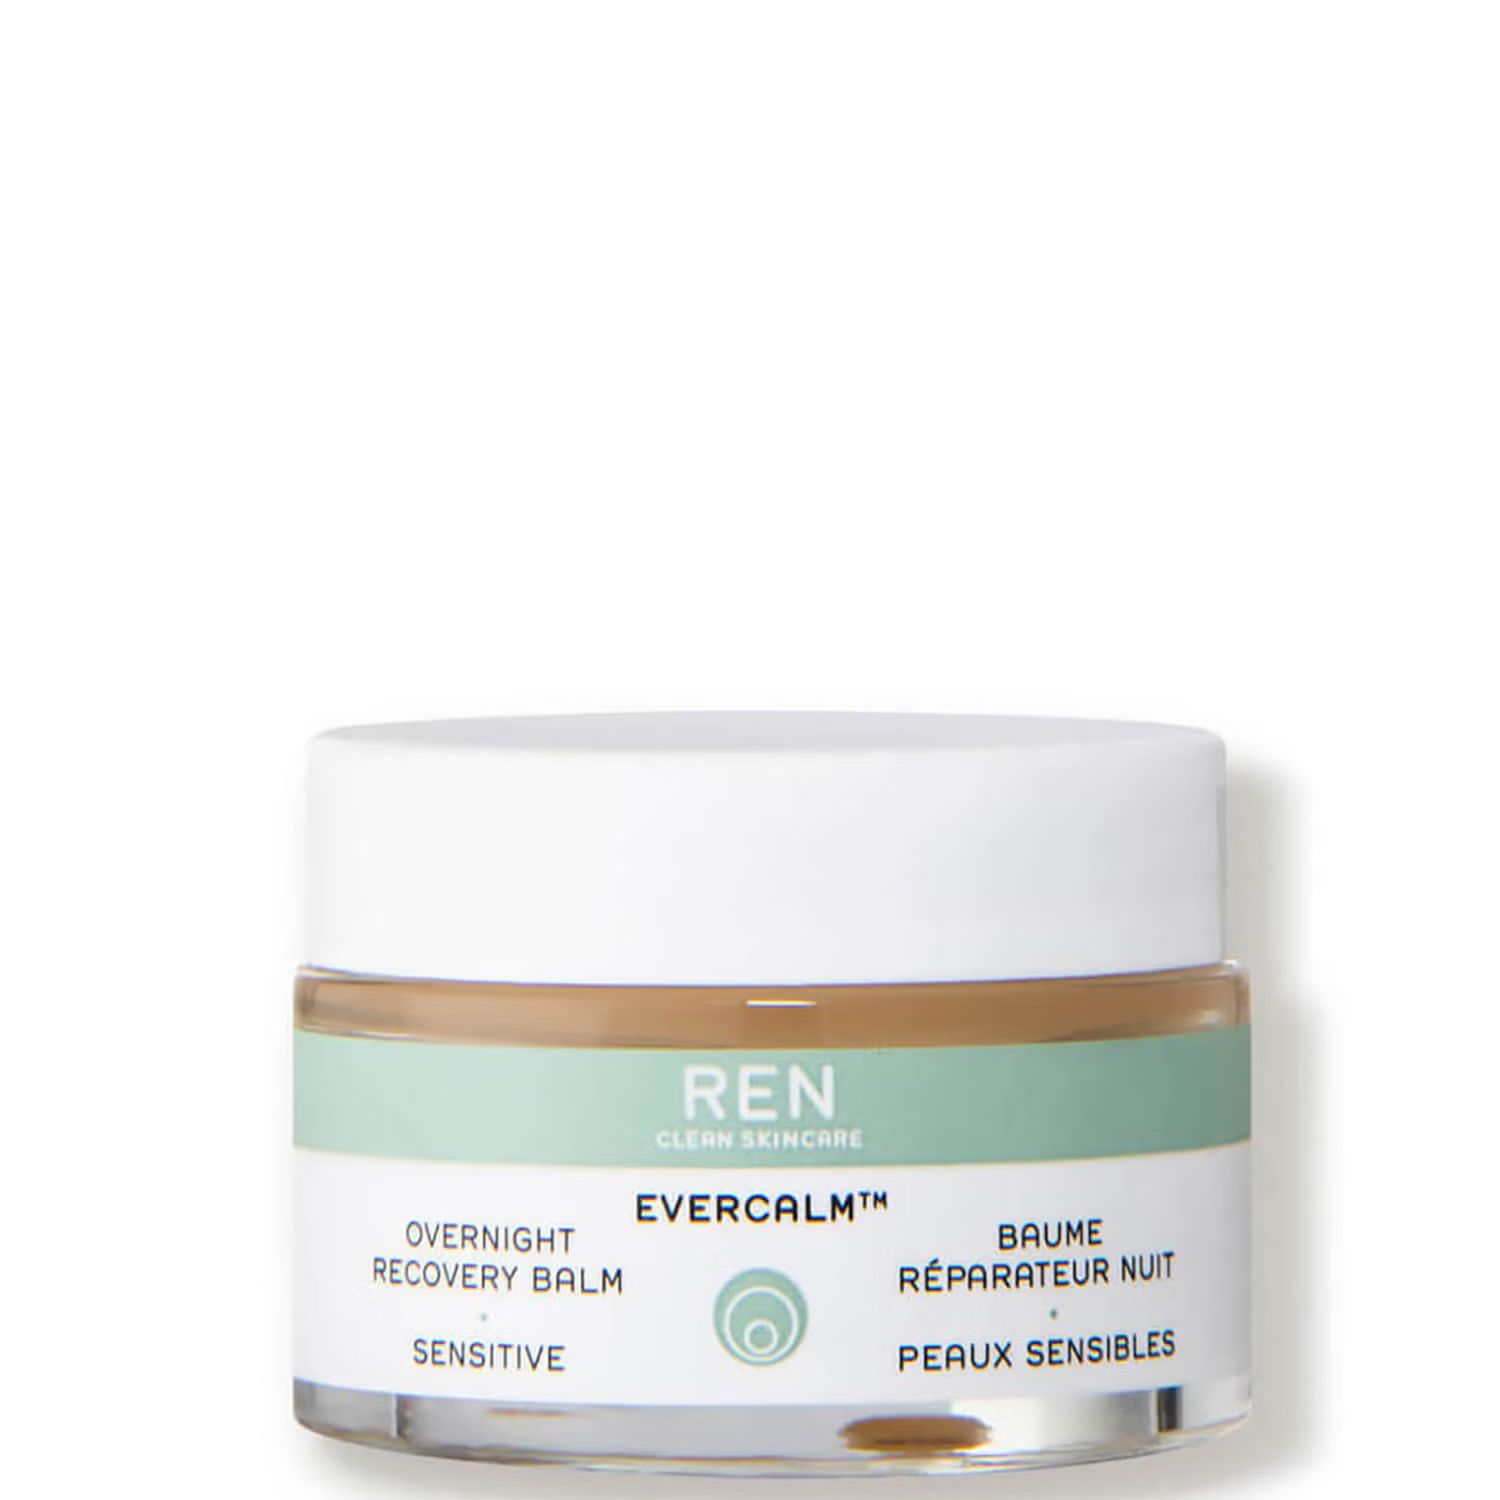 REN Clean Skincare - Evercalm Overnight Recovery Balm 30ml | Look Fantastic (ROW)